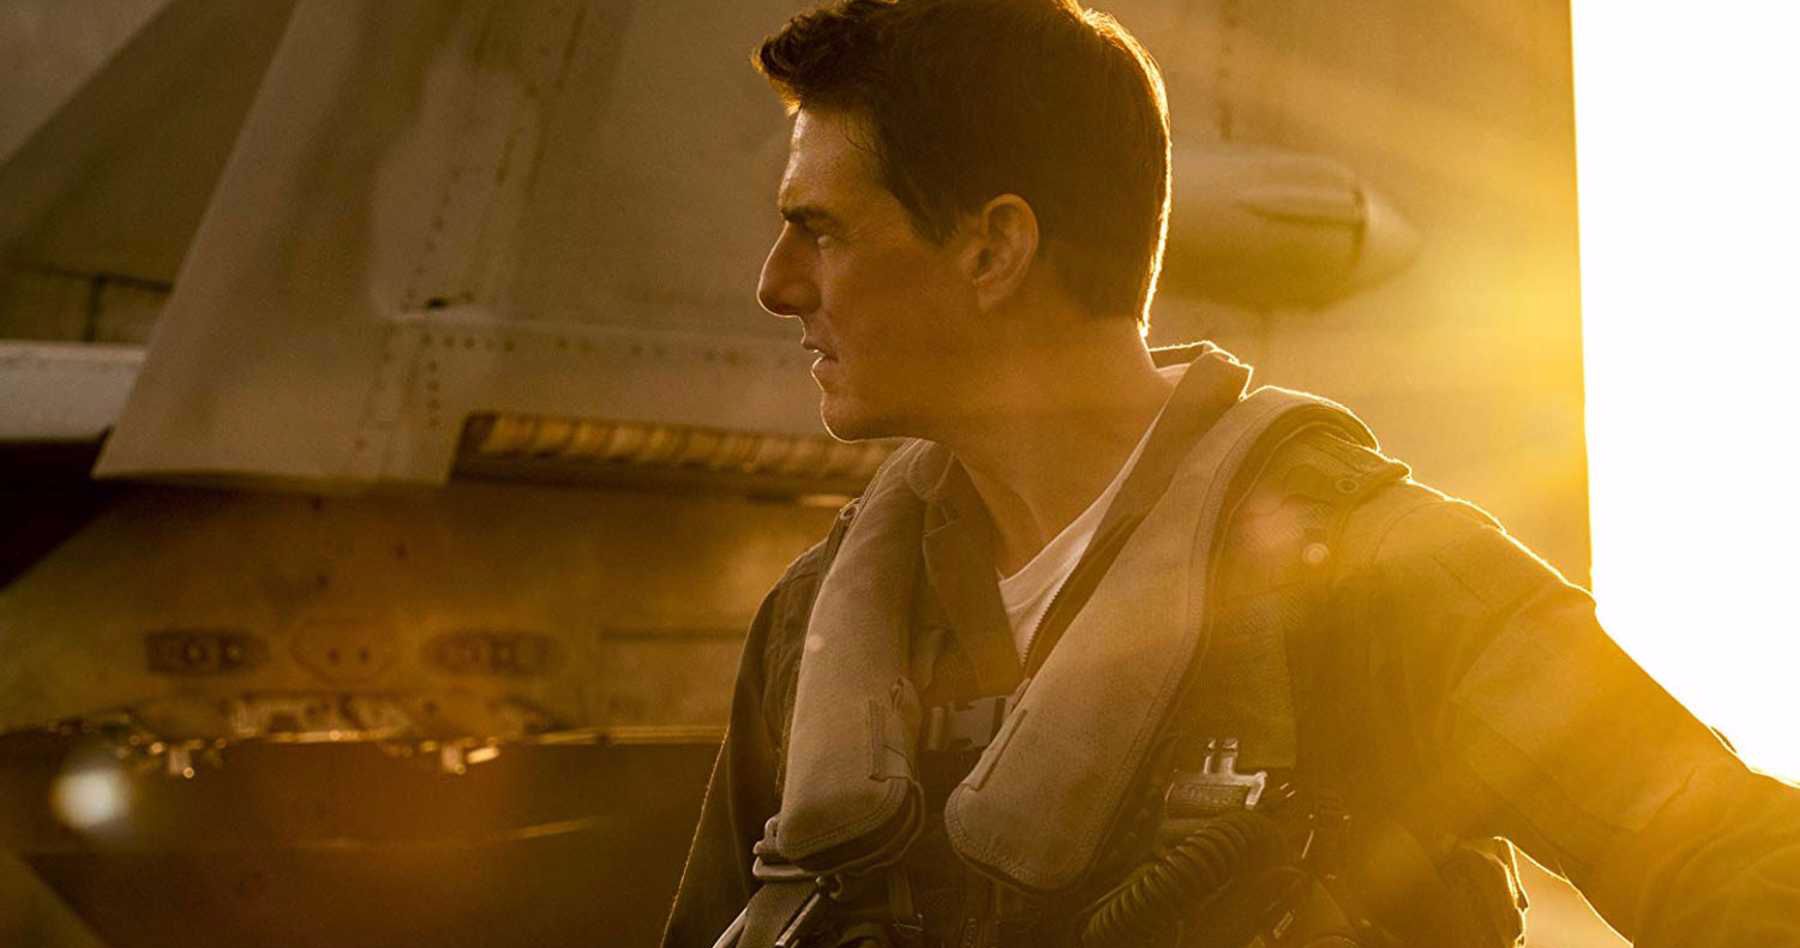 New Top Gun 2 Tease Has Maverick Ready to Confront His Past and Fly Into the Future